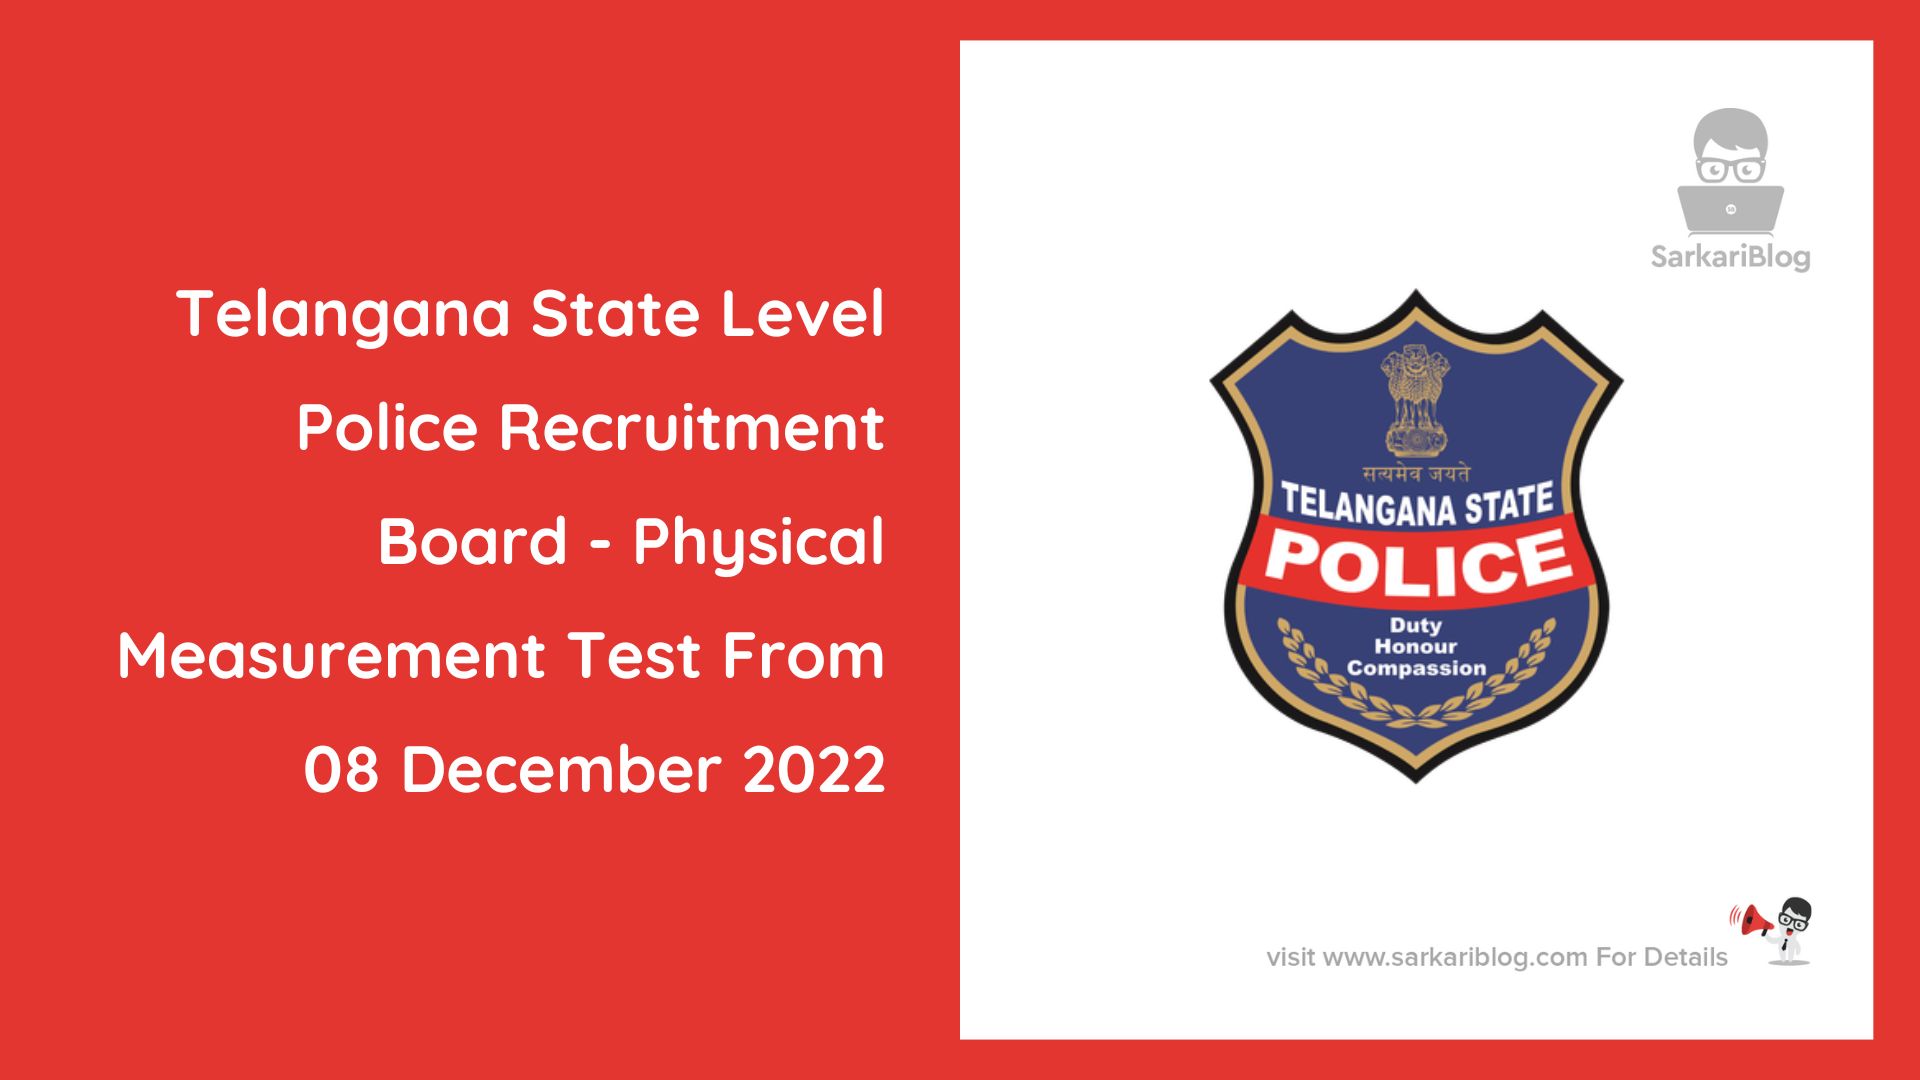 TS Police Physical Test From 8th December 2022: Telangana State Level Police Recruitment Board (TSLPRB) on Sunday said that the physical measurement test/ physical efficiency test (PMT/PET) for the ongoing police recruitment drive in the test will begin on December 8 and admit cards or hall tickets for these exams will be published tomorrow, December 29 on tslprb.in.